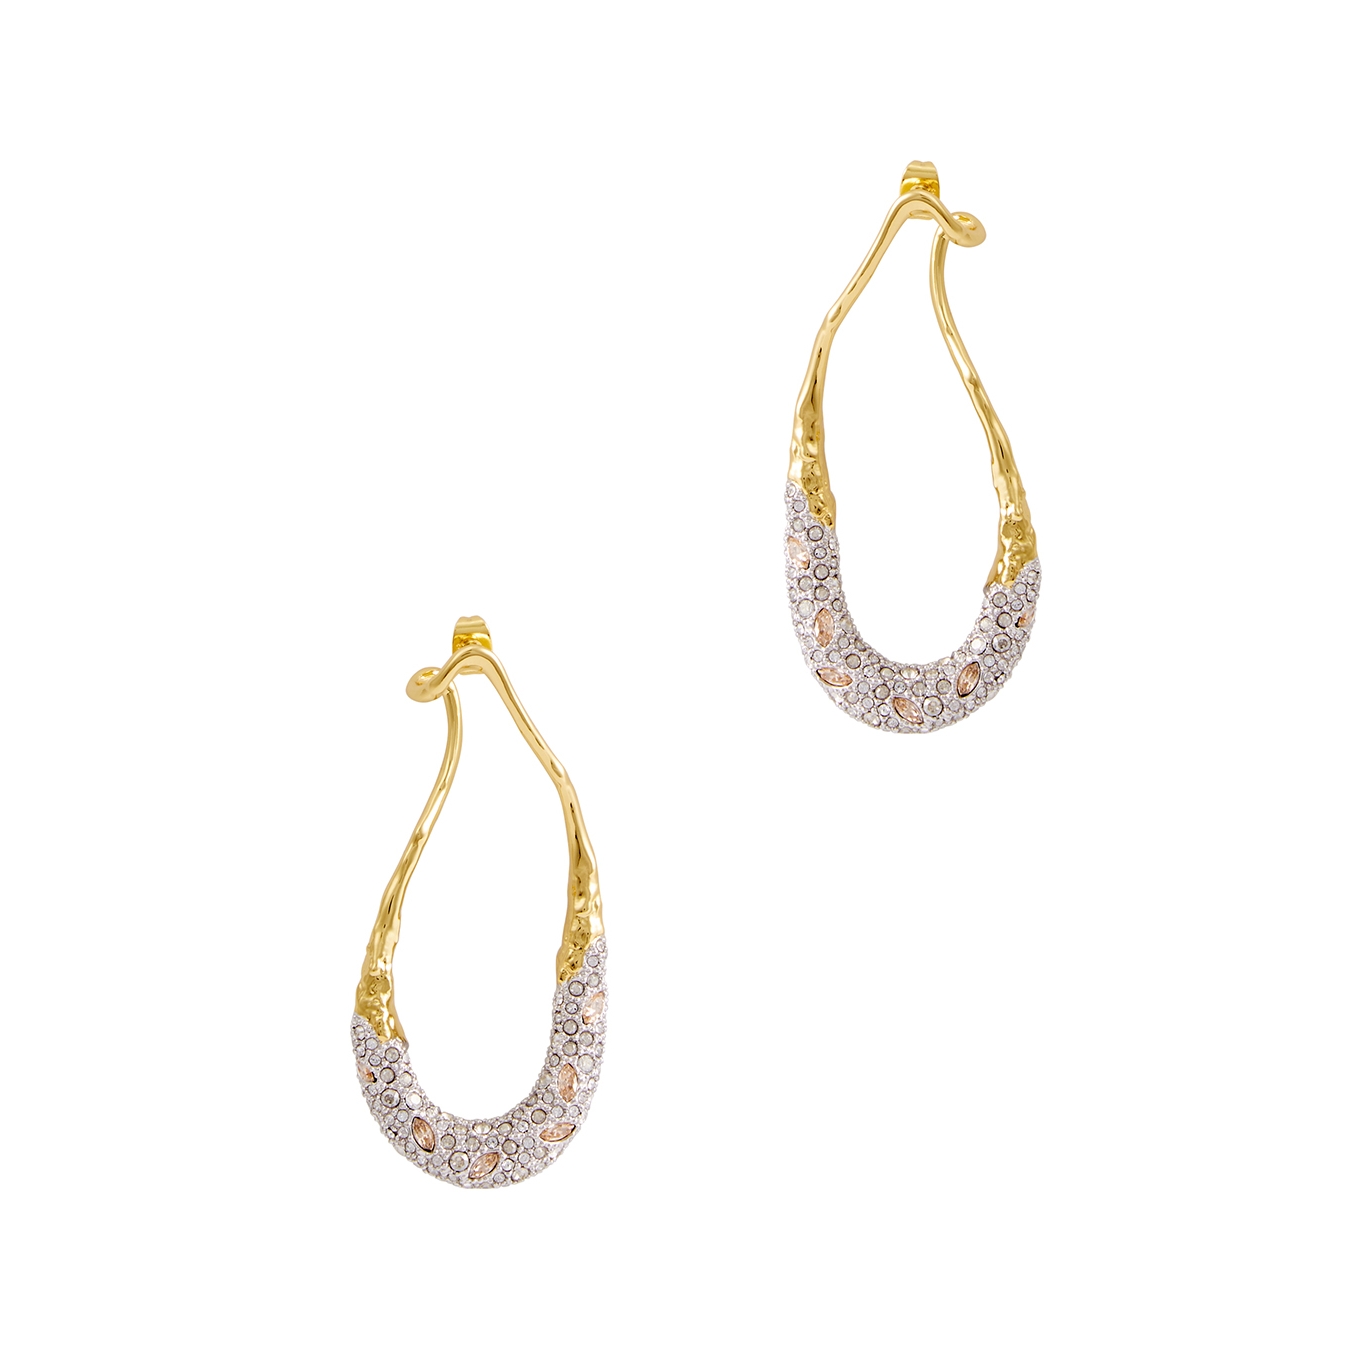 Alexis Bittar Solanales Embellished 14kt Gold-plated Drop Earrings - One Size